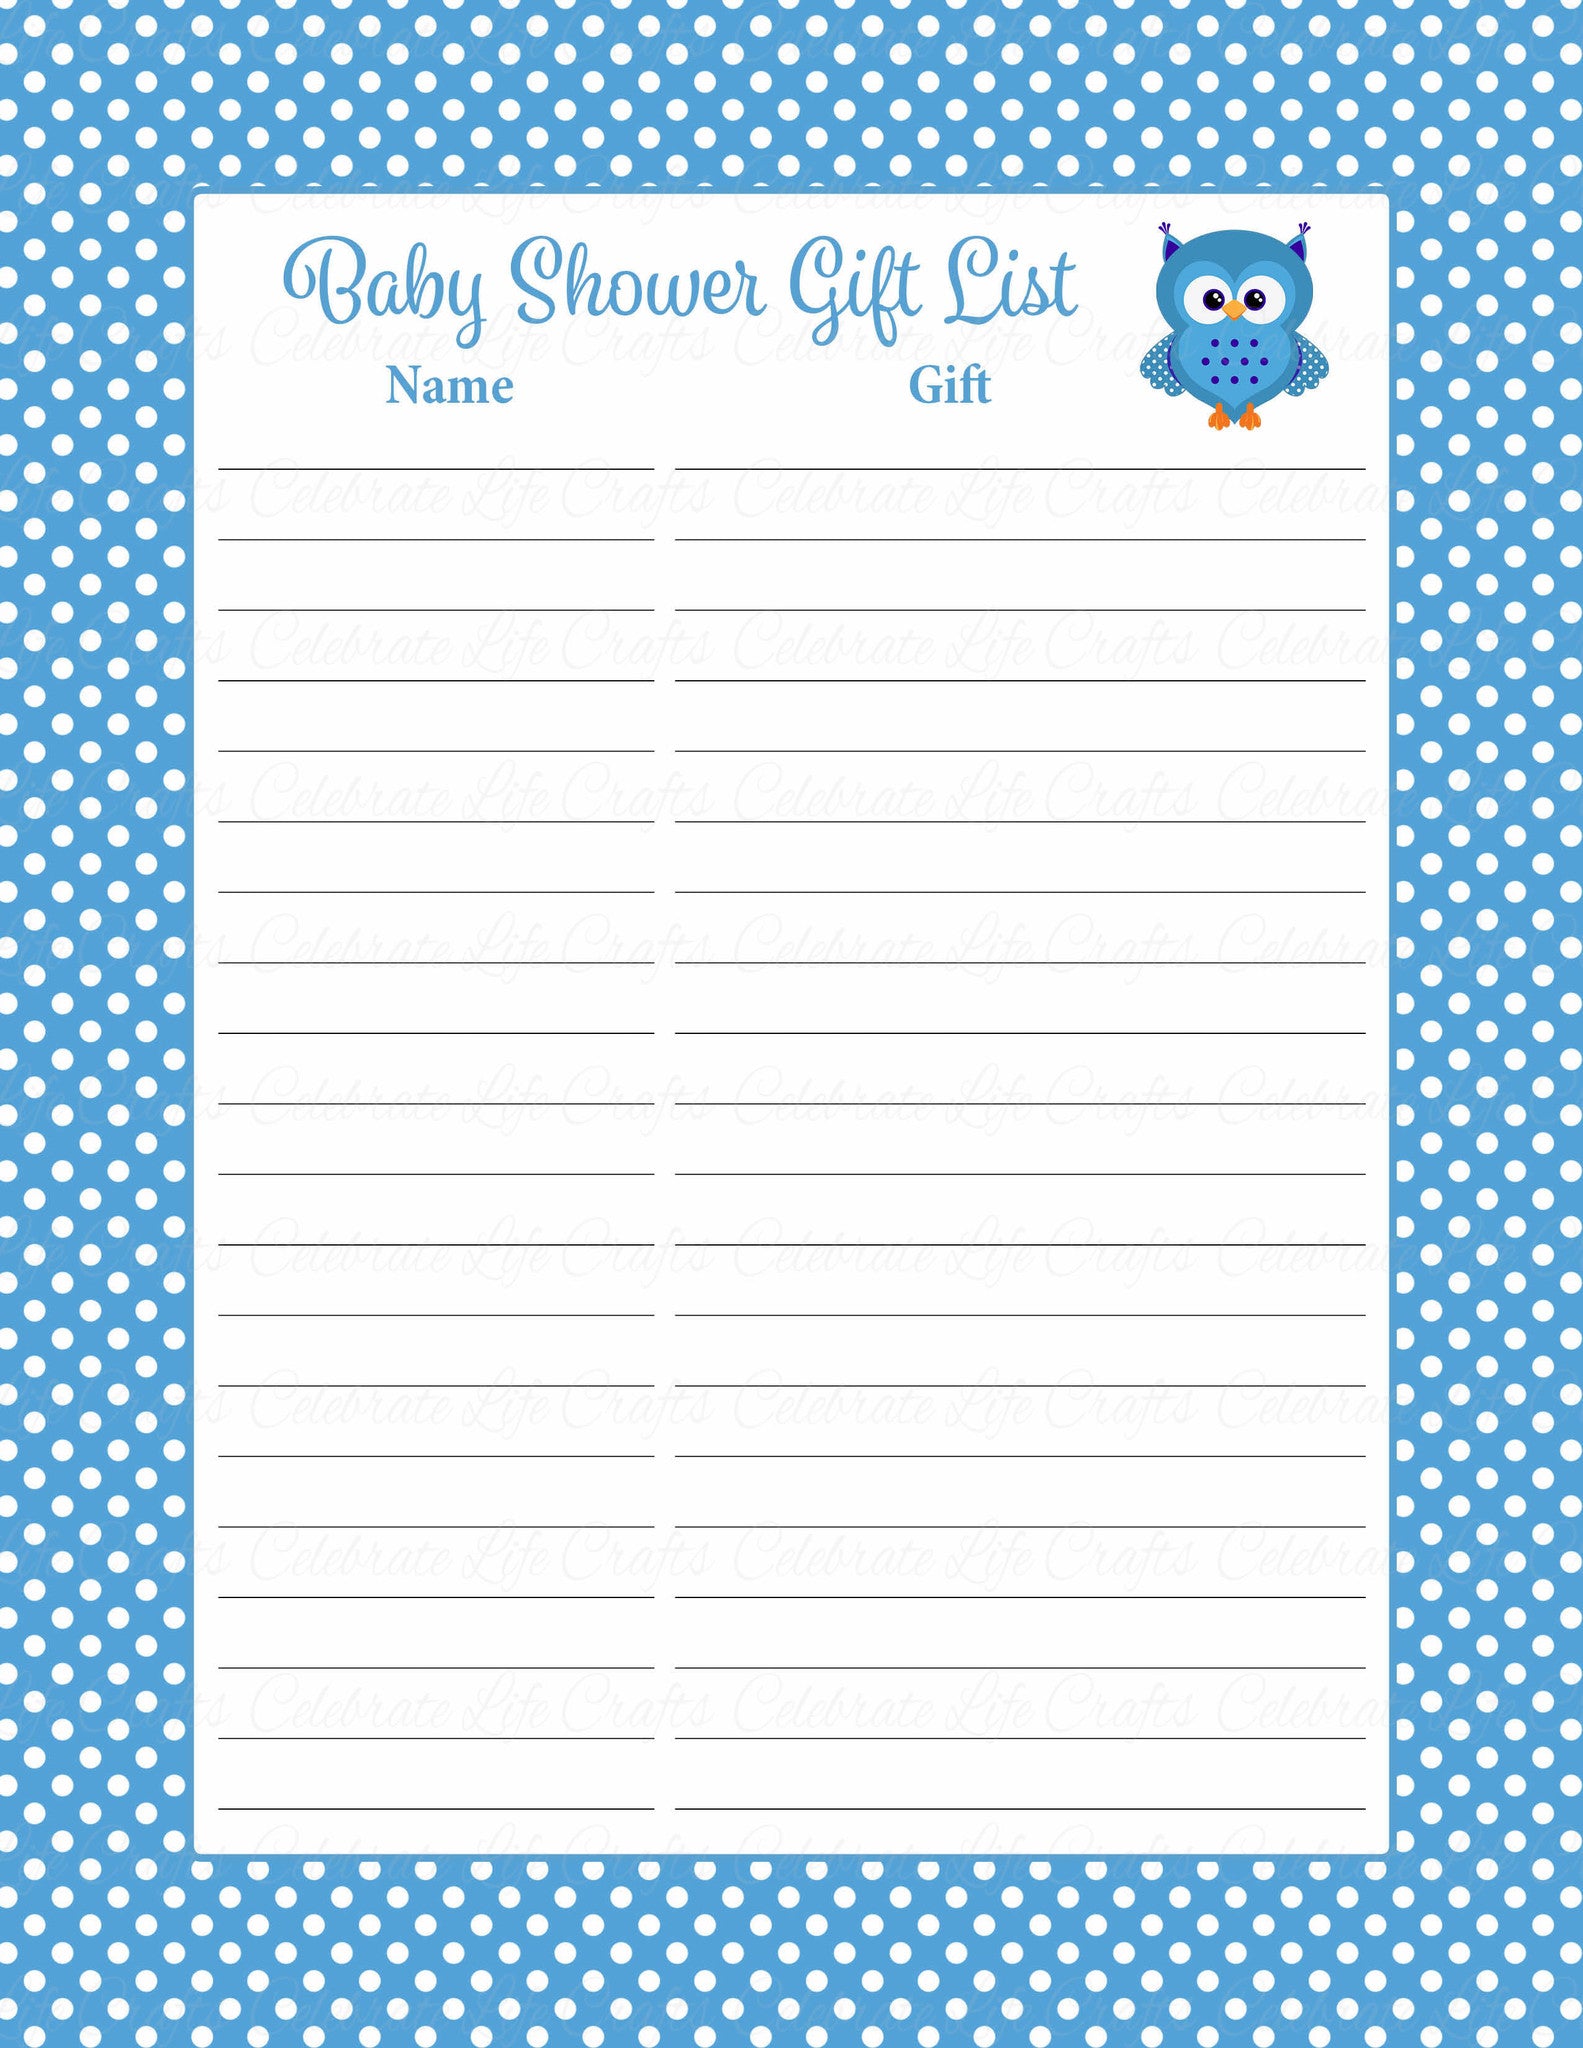 Baby Shower Gift List Owl Baby Shower Theme For Baby Boy Blue